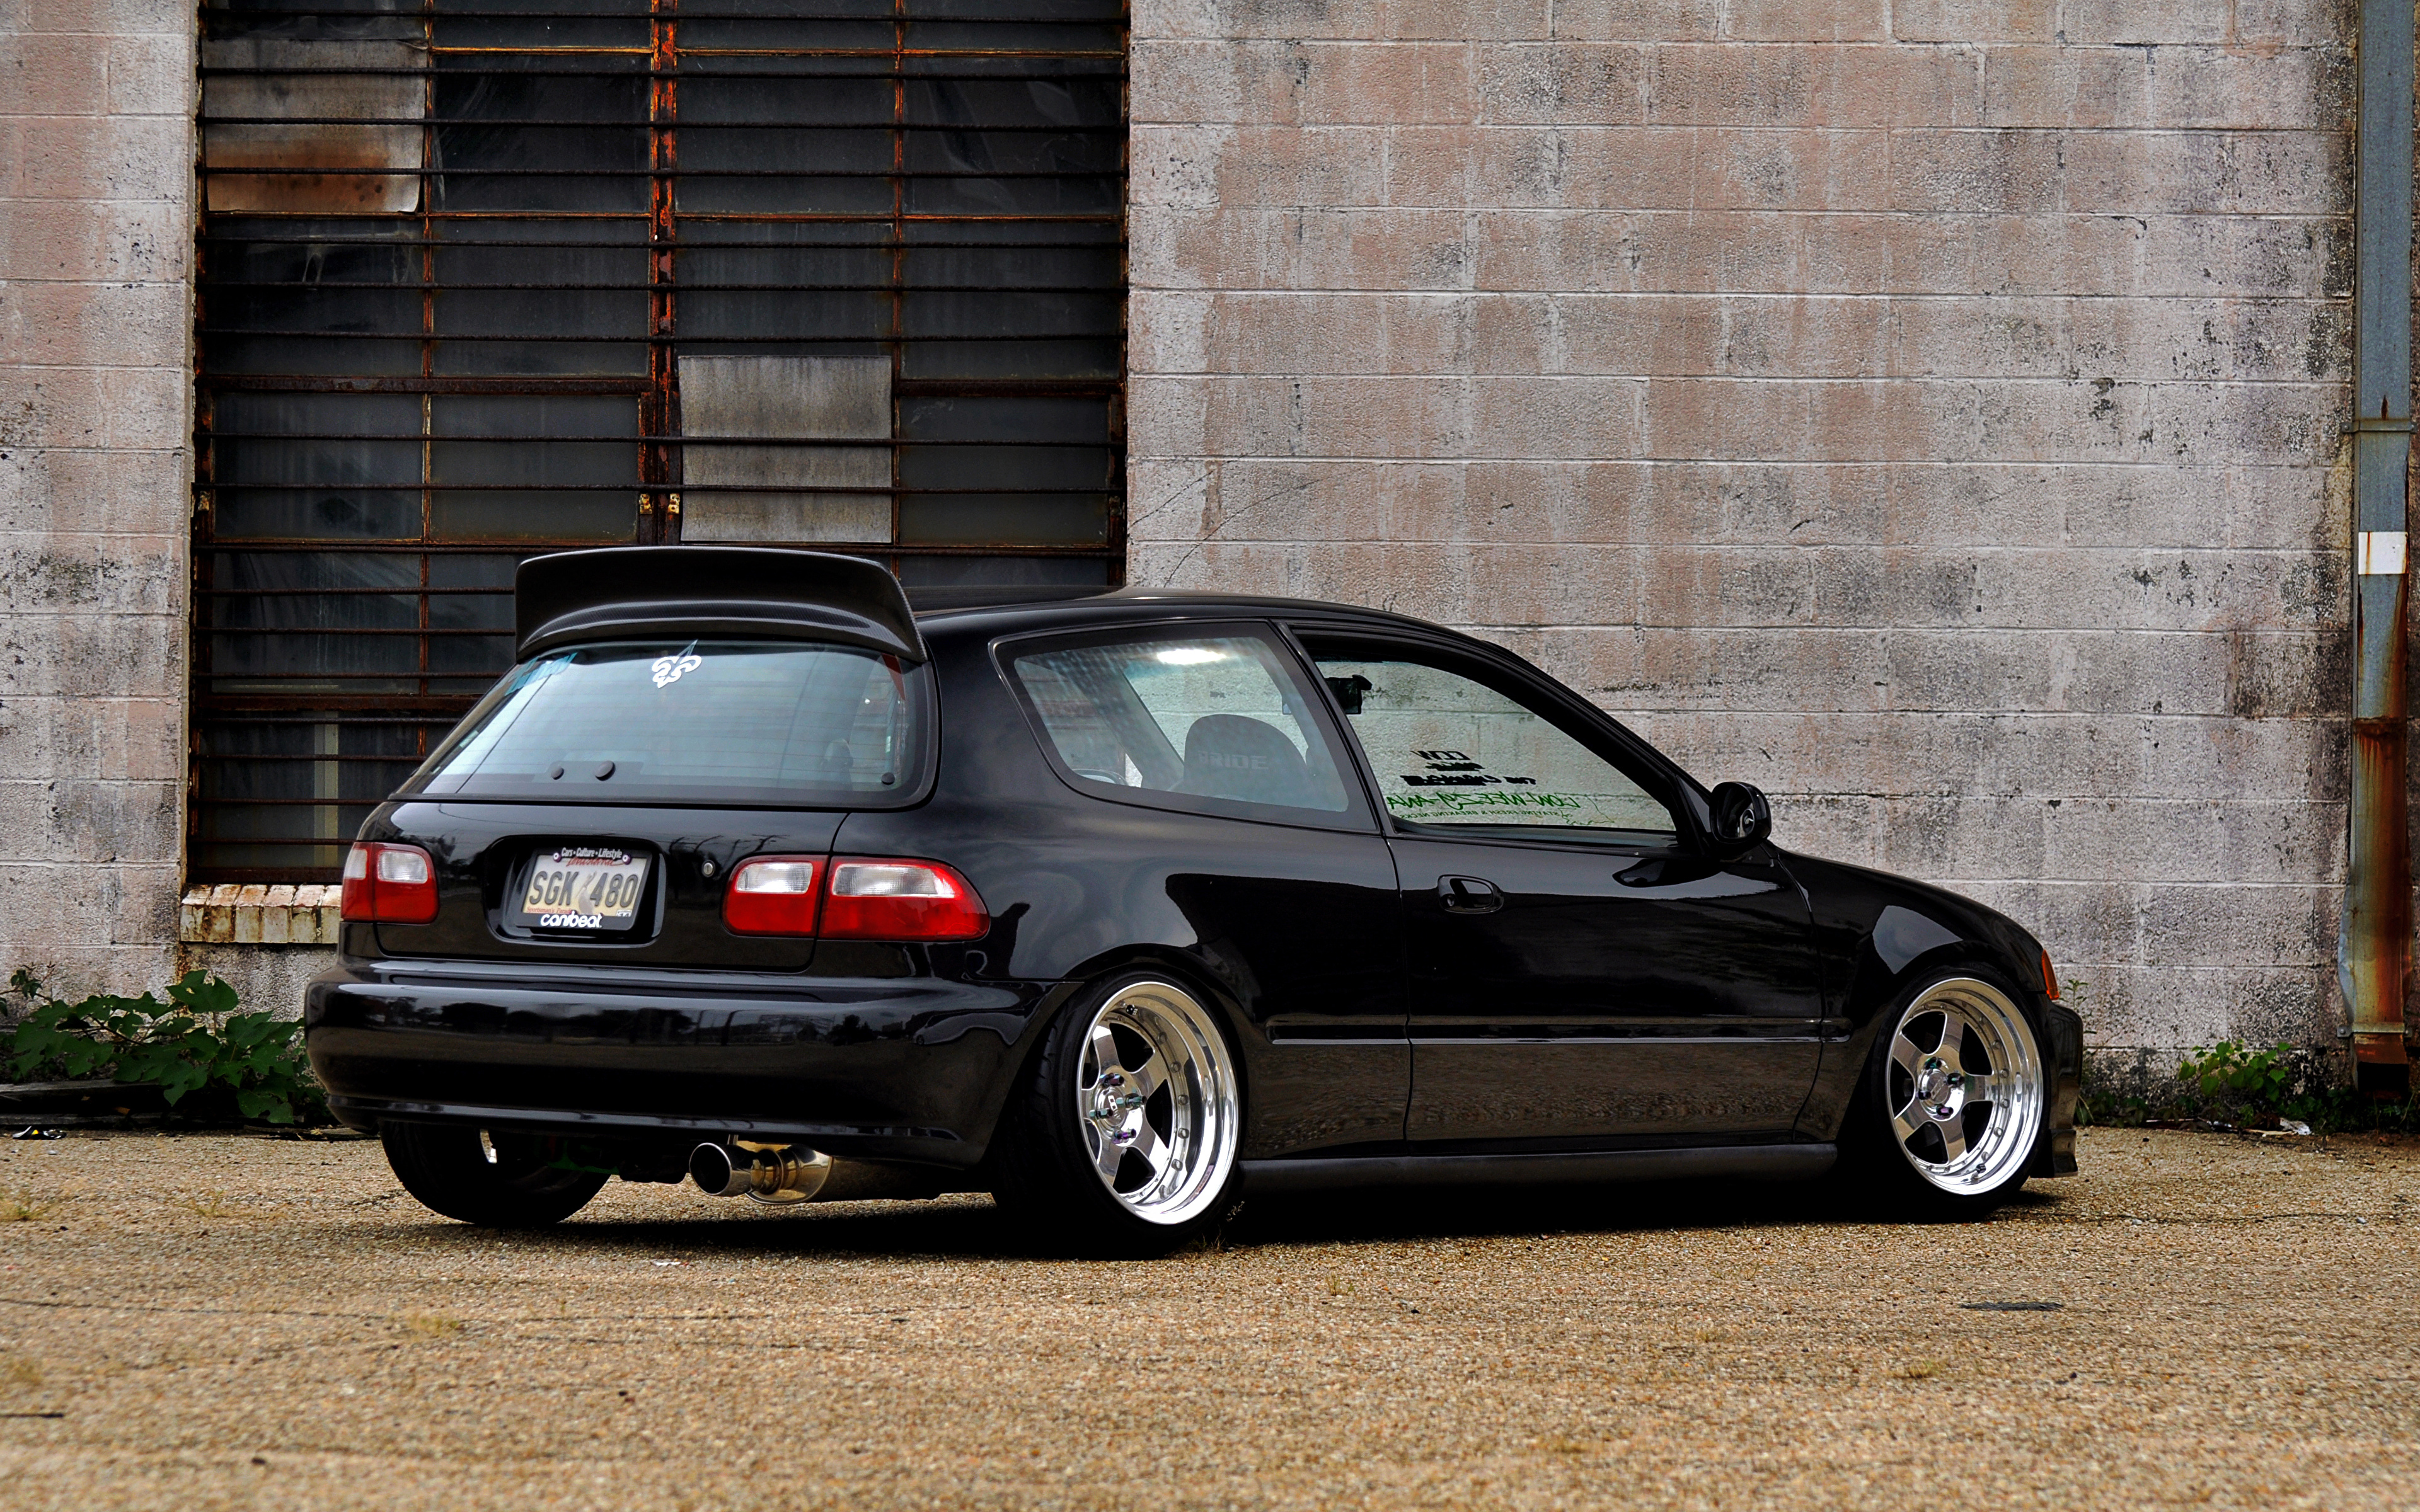 Picture Honda Civic Eg6 Stance Bellyscrapers Low Ccw Black